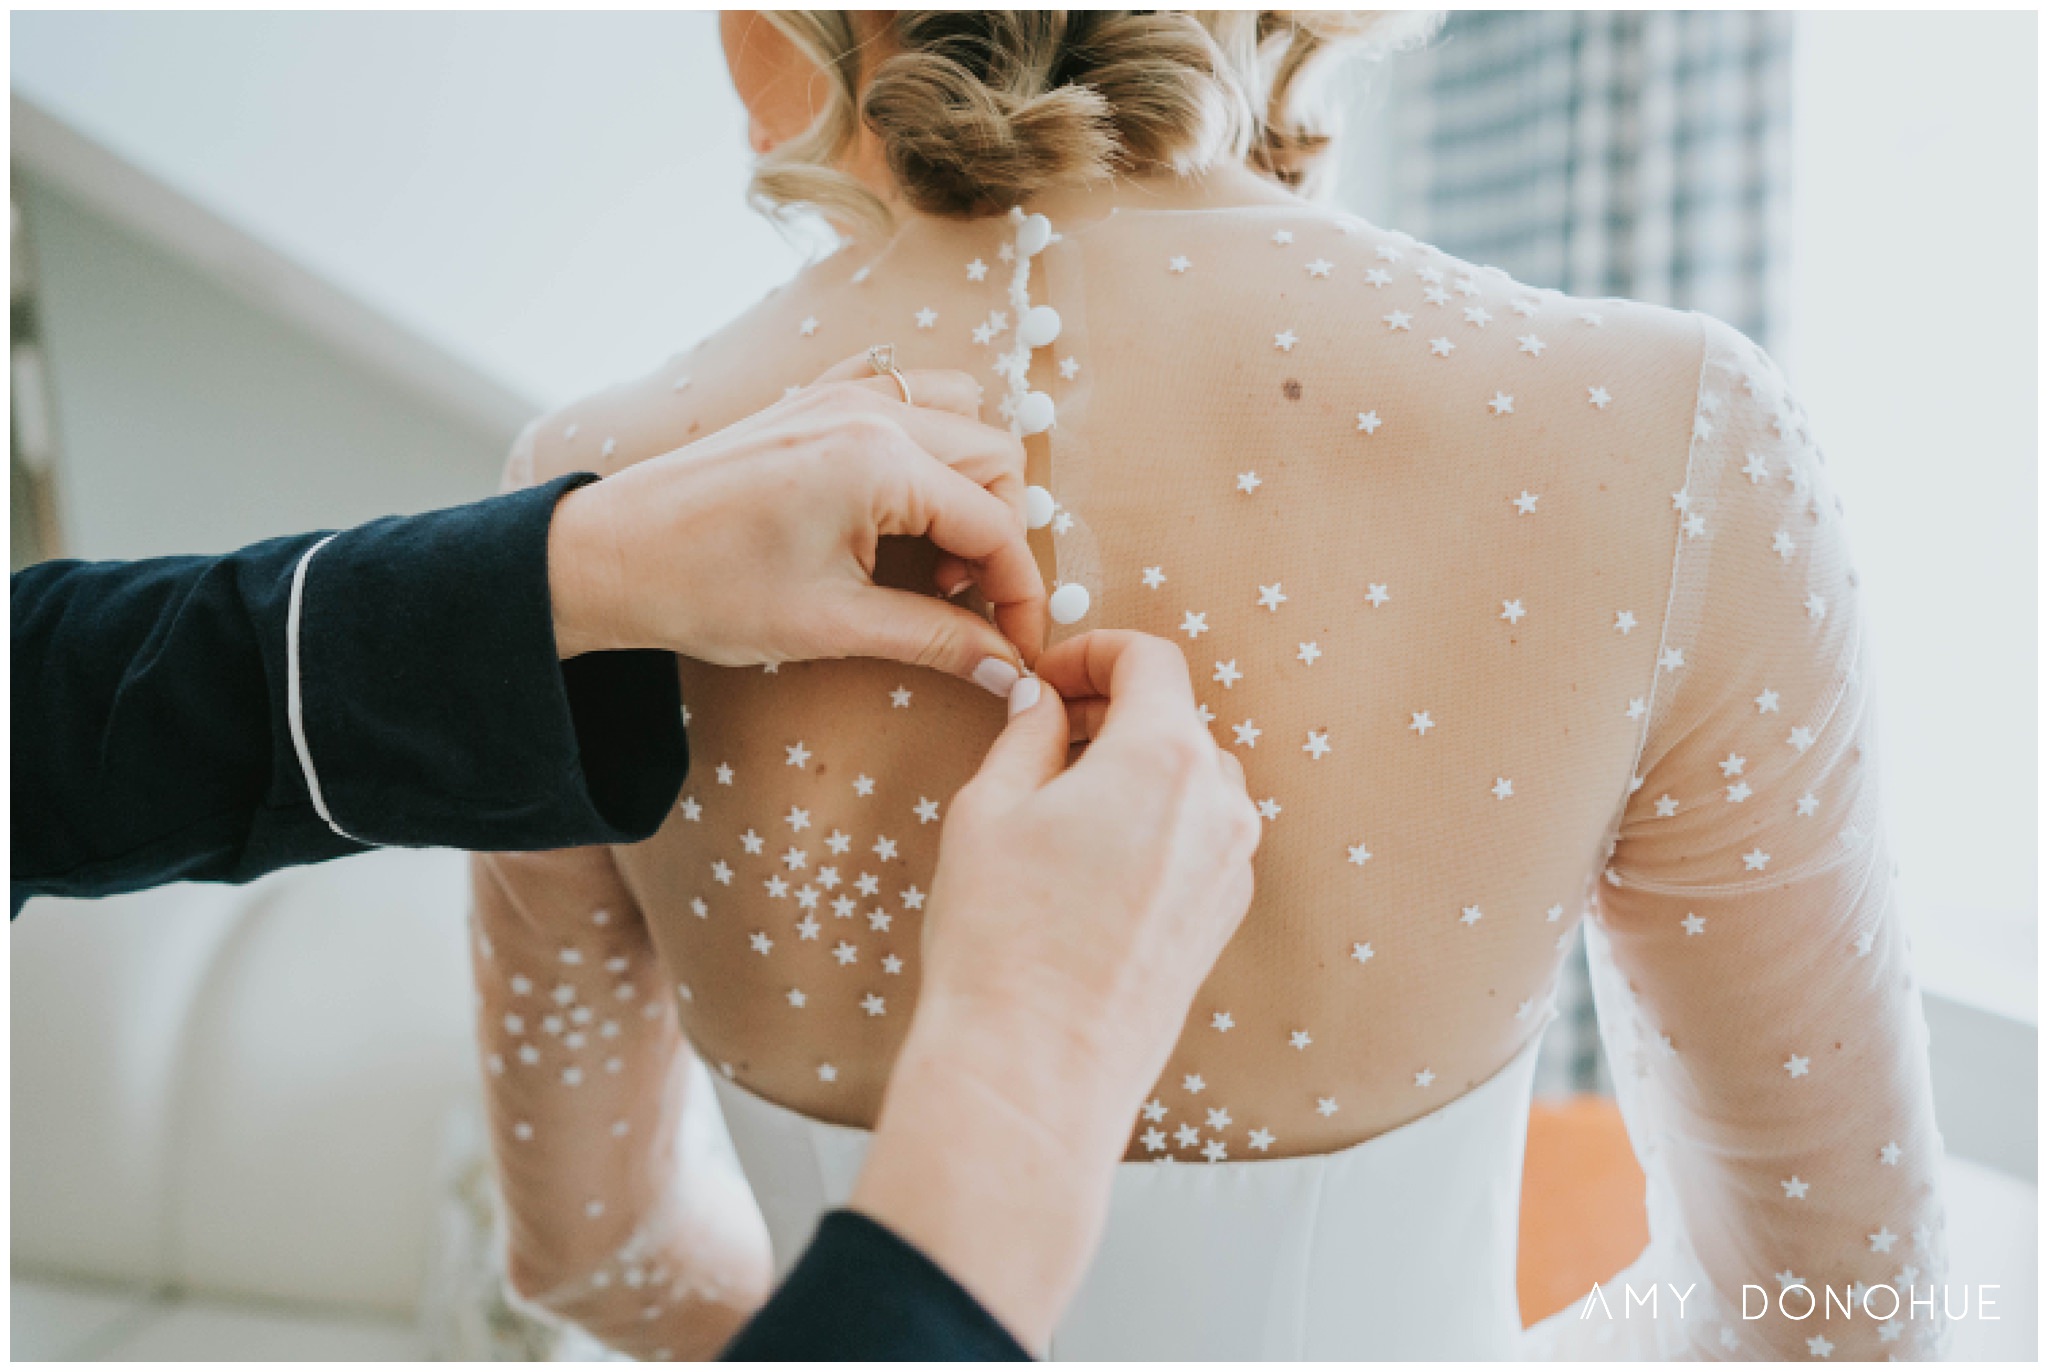 Getting into the dress | Vermont Wedding Photographer | © Amy Donohue Photography